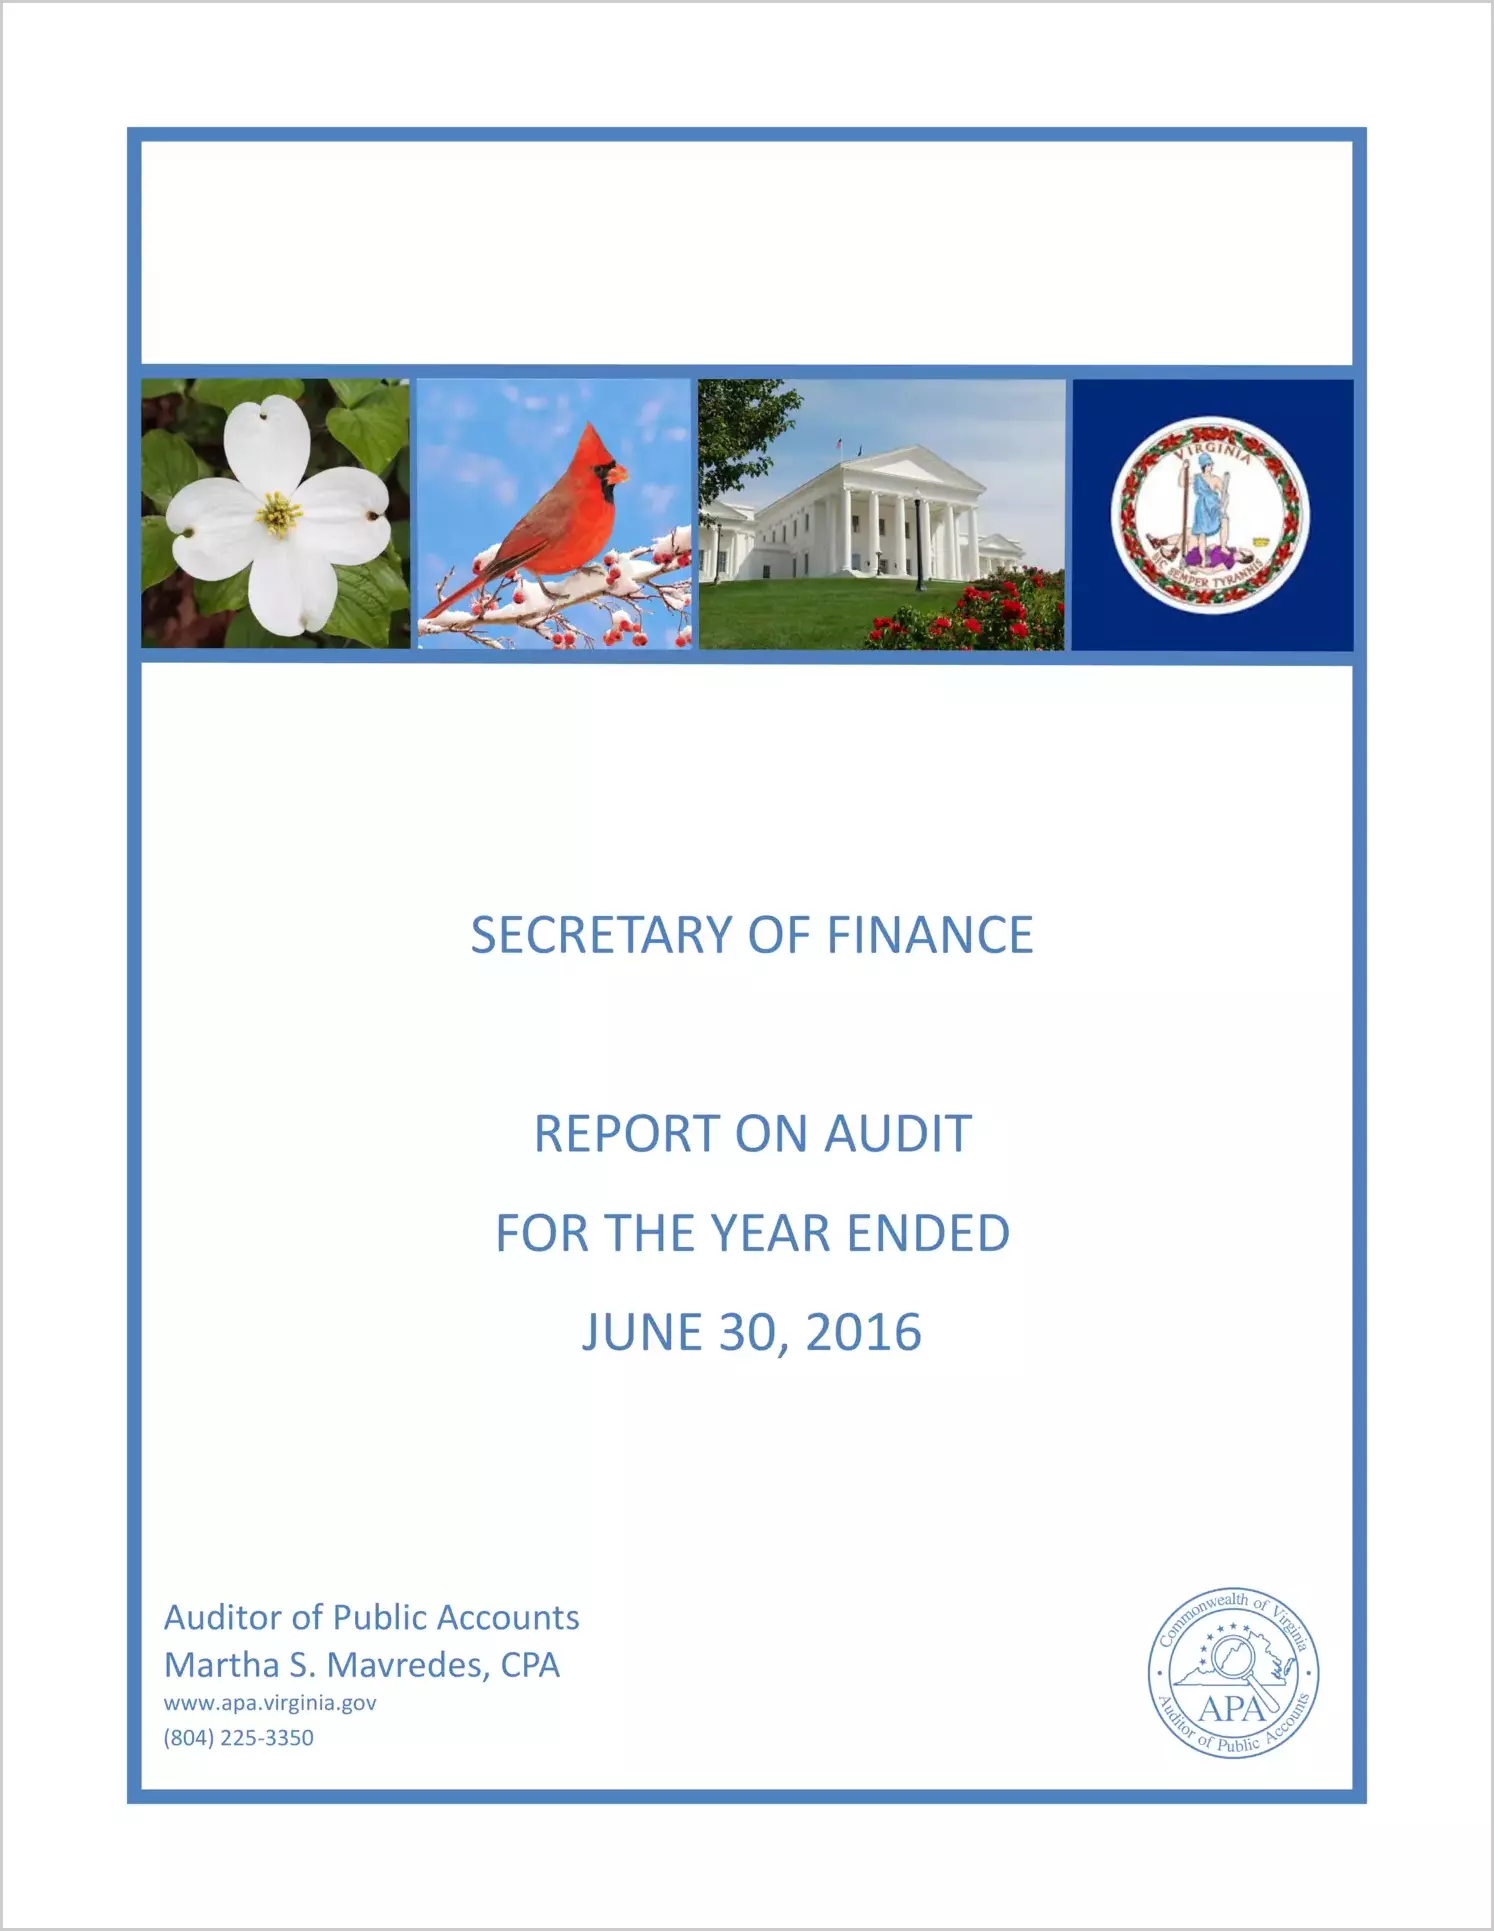 Secretary of Finance for the year ended June 30, 2016